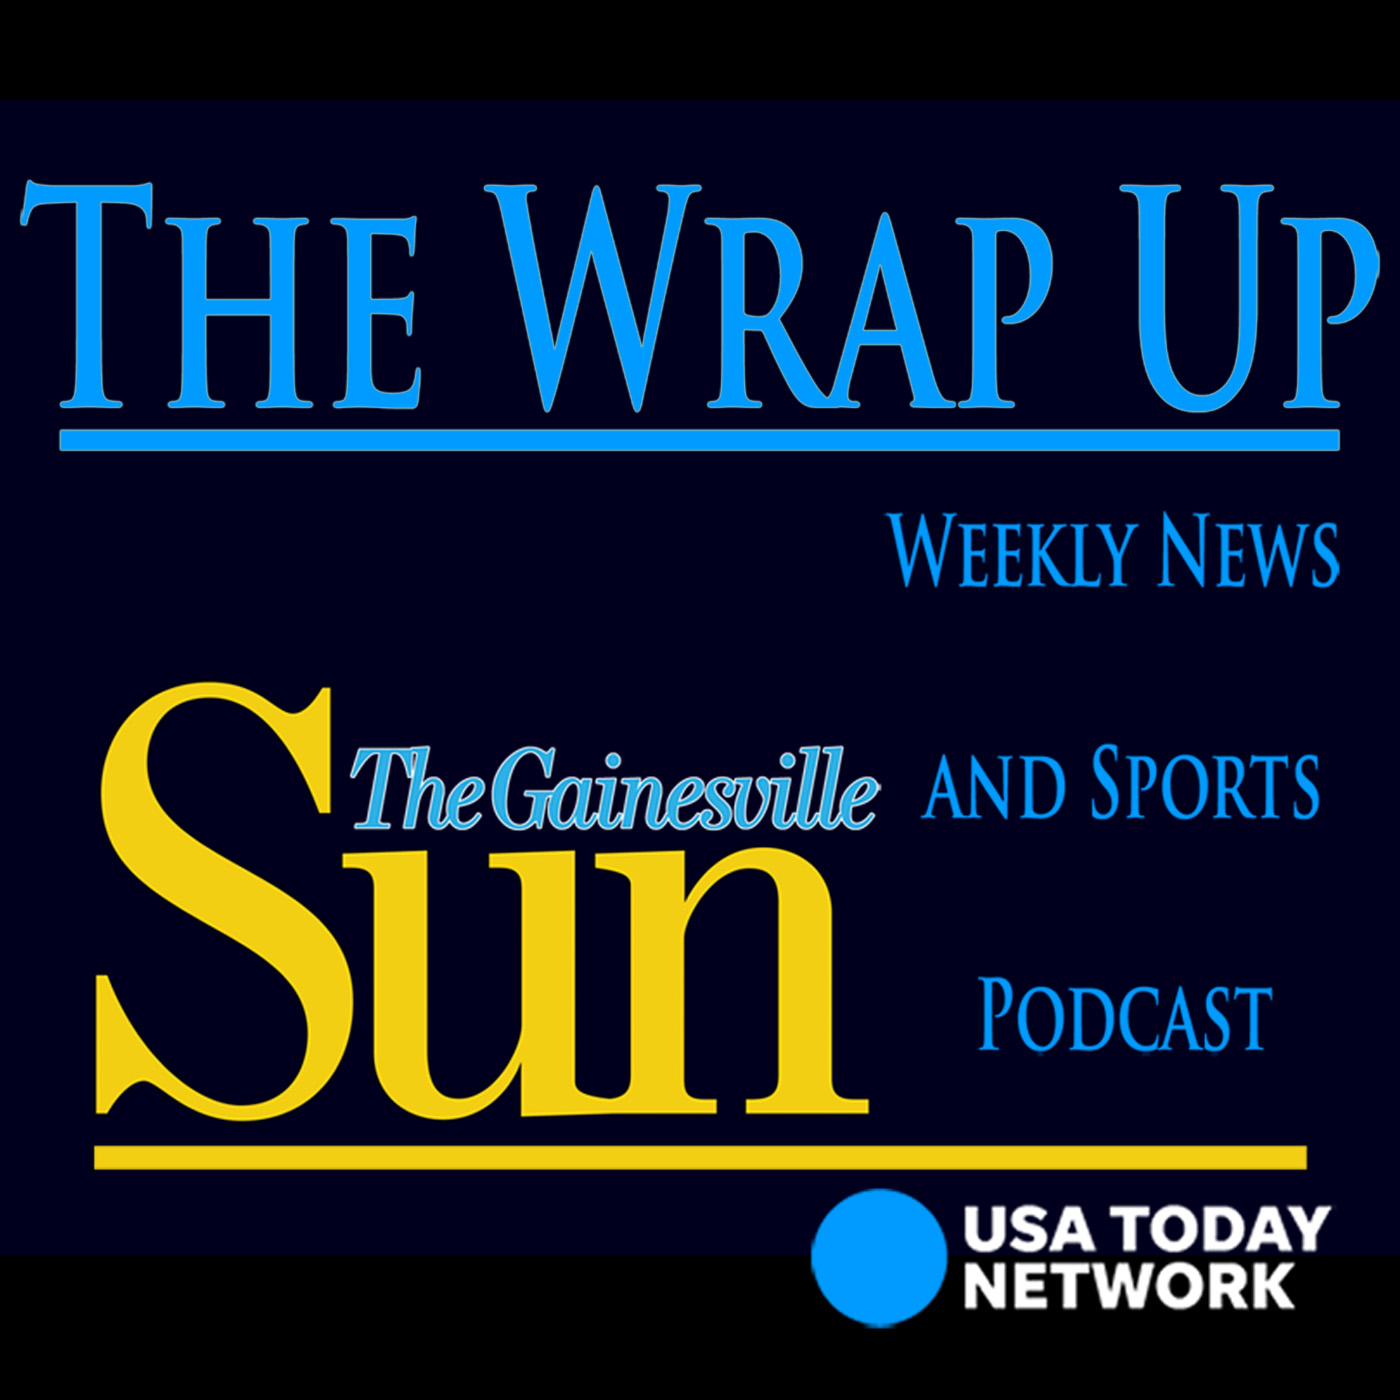 Listen to the news and sports stories for the week of Aug. 20-26, 2022